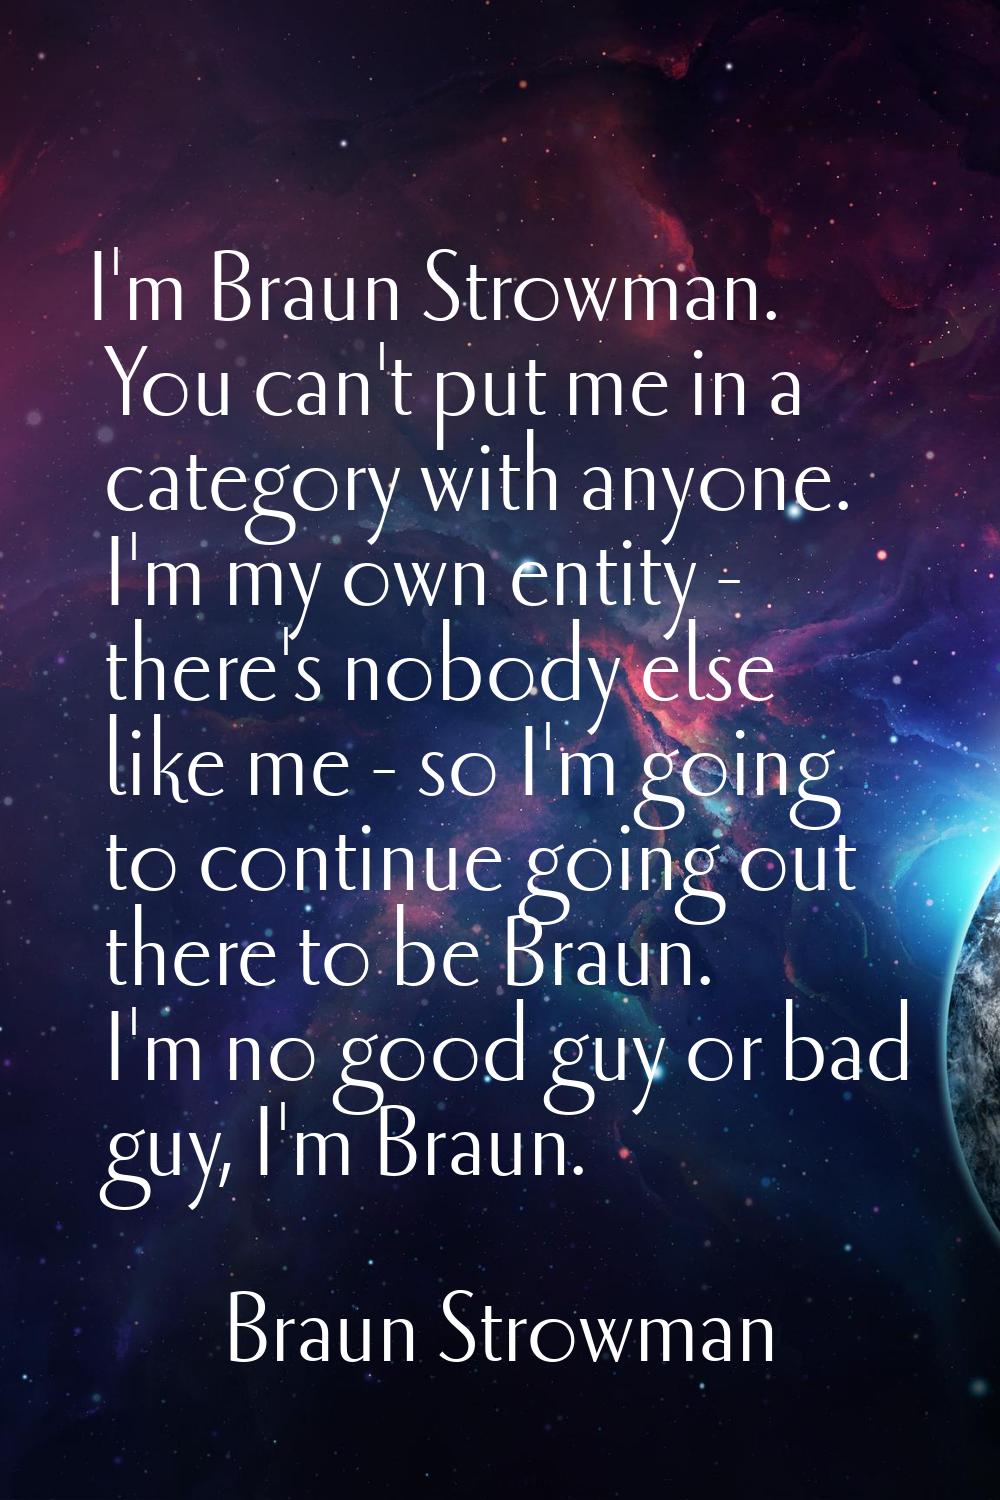 I'm Braun Strowman. You can't put me in a category with anyone. I'm my own entity - there's nobody 